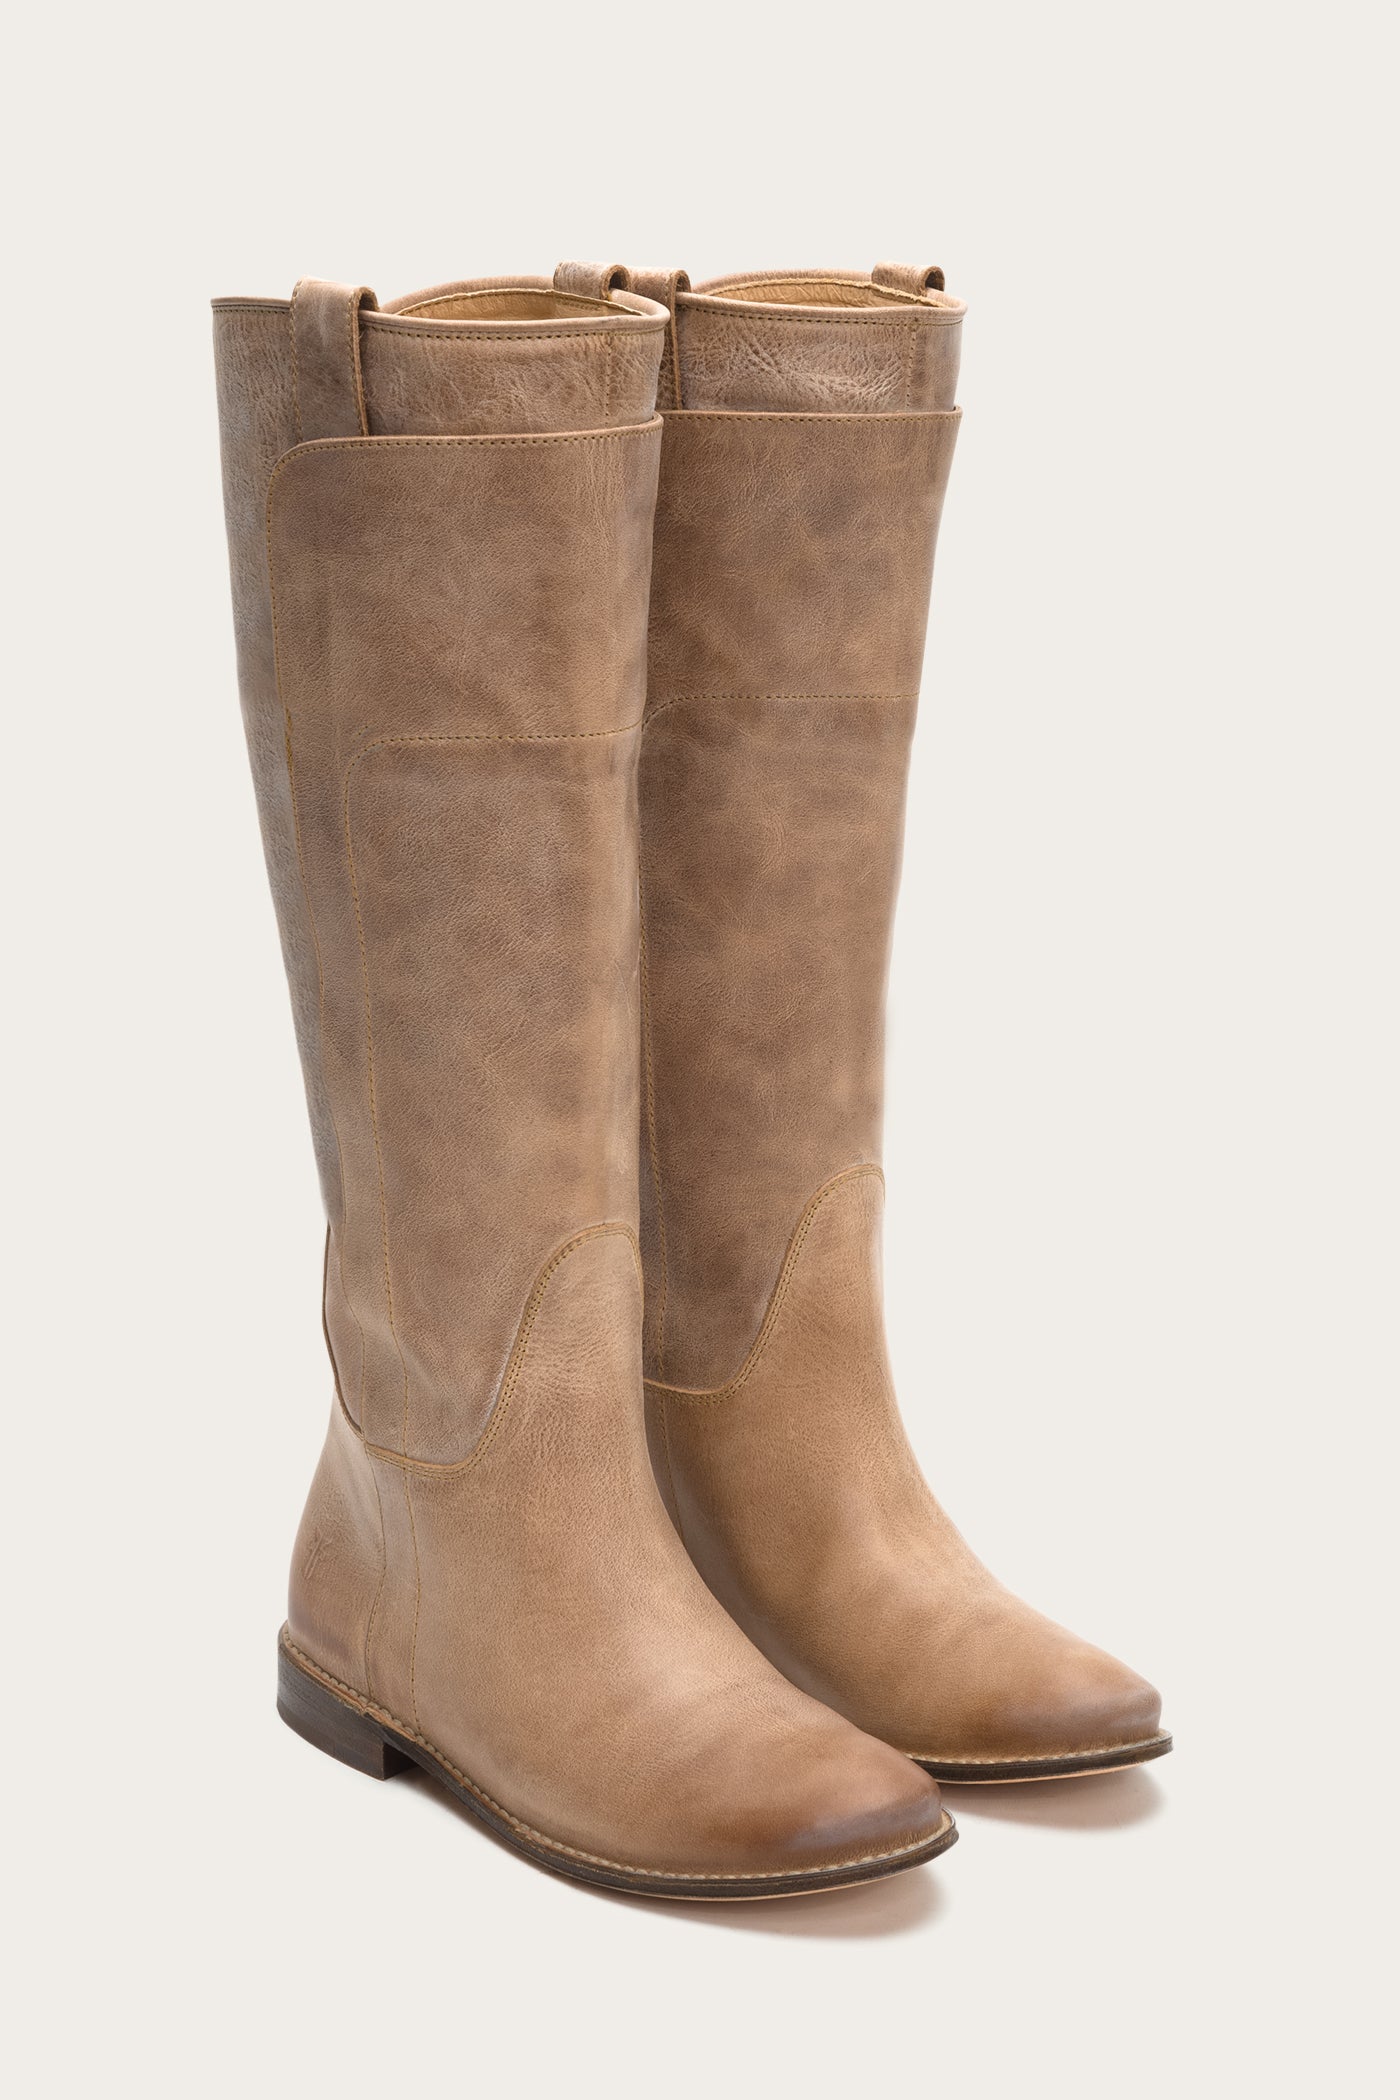 frye paige riding boots